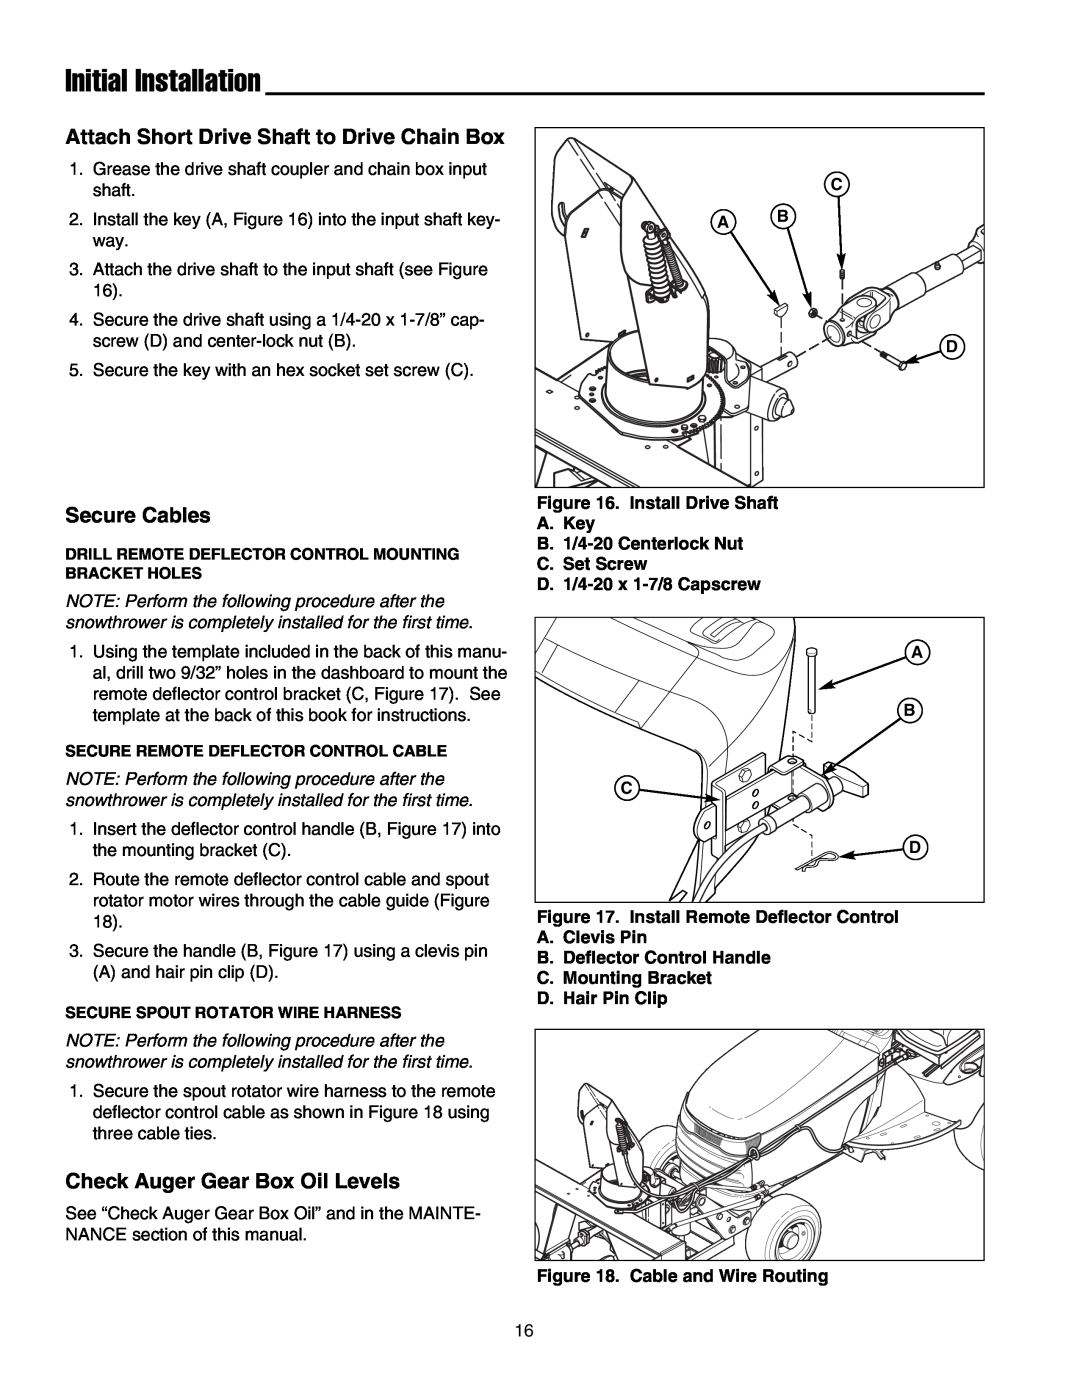 Massey Ferguson L&G 1694404 Attach Short Drive Shaft to Drive Chain Box, Secure Cables, Check Auger Gear Box Oil Levels 